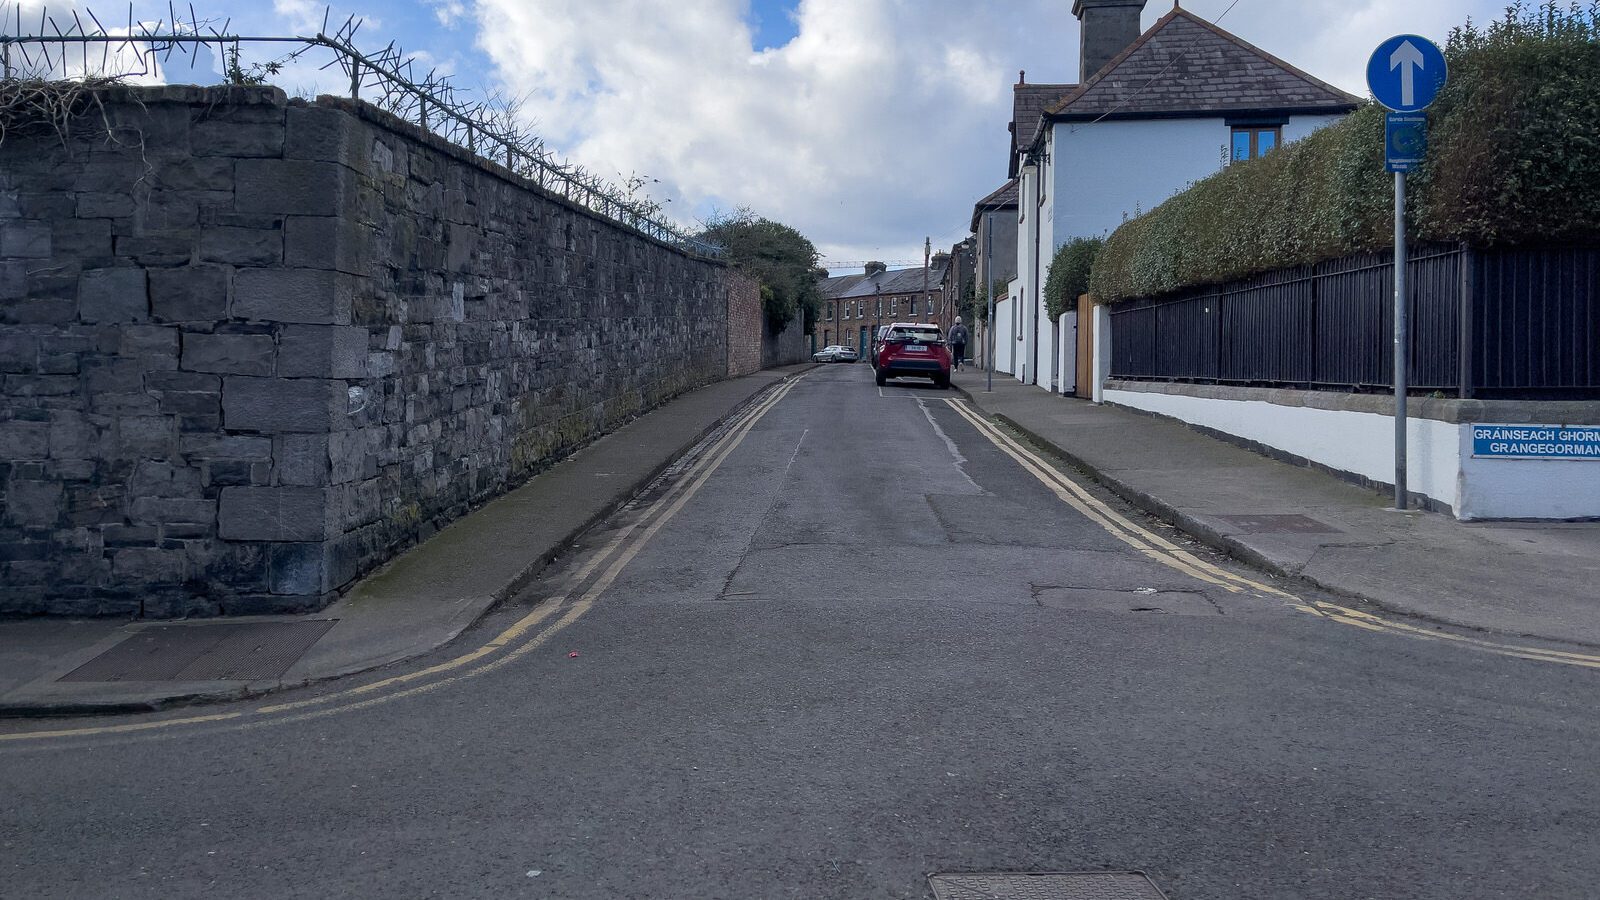 EXPLORING GRANGEGORMAN LOWER [WHICH IS BOTH A STREET AND AN AREA OR DISTRICT]-229026-1